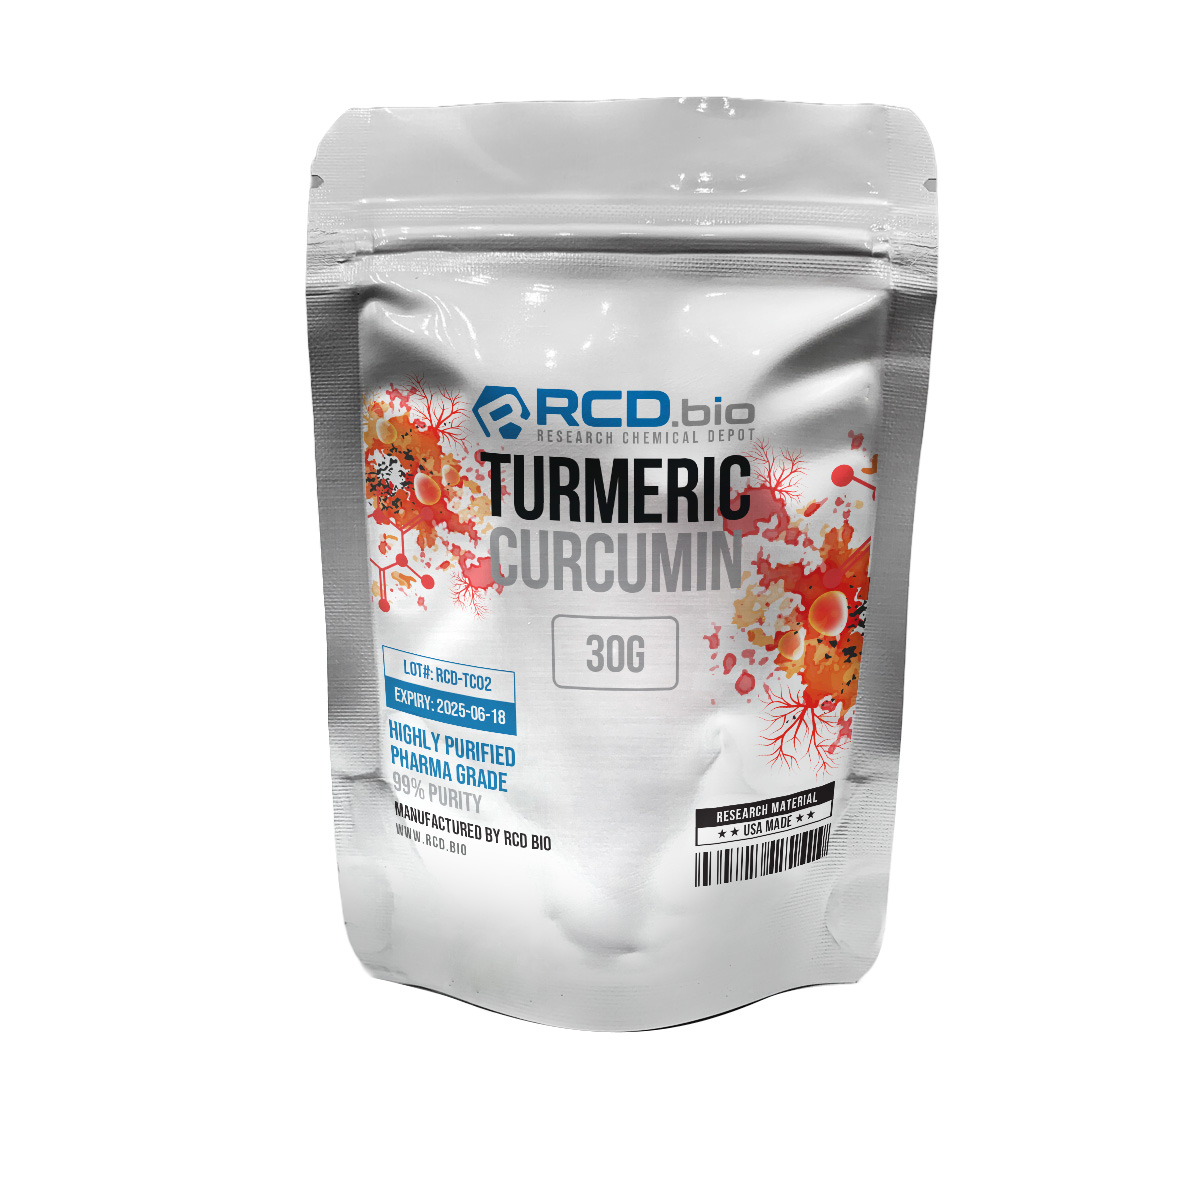 Turmeric Curcumin Powder from RCD.bio in USA. At RCD.bio all our compounds are 3rd party tested to ensure quality and purity. Buy Now!